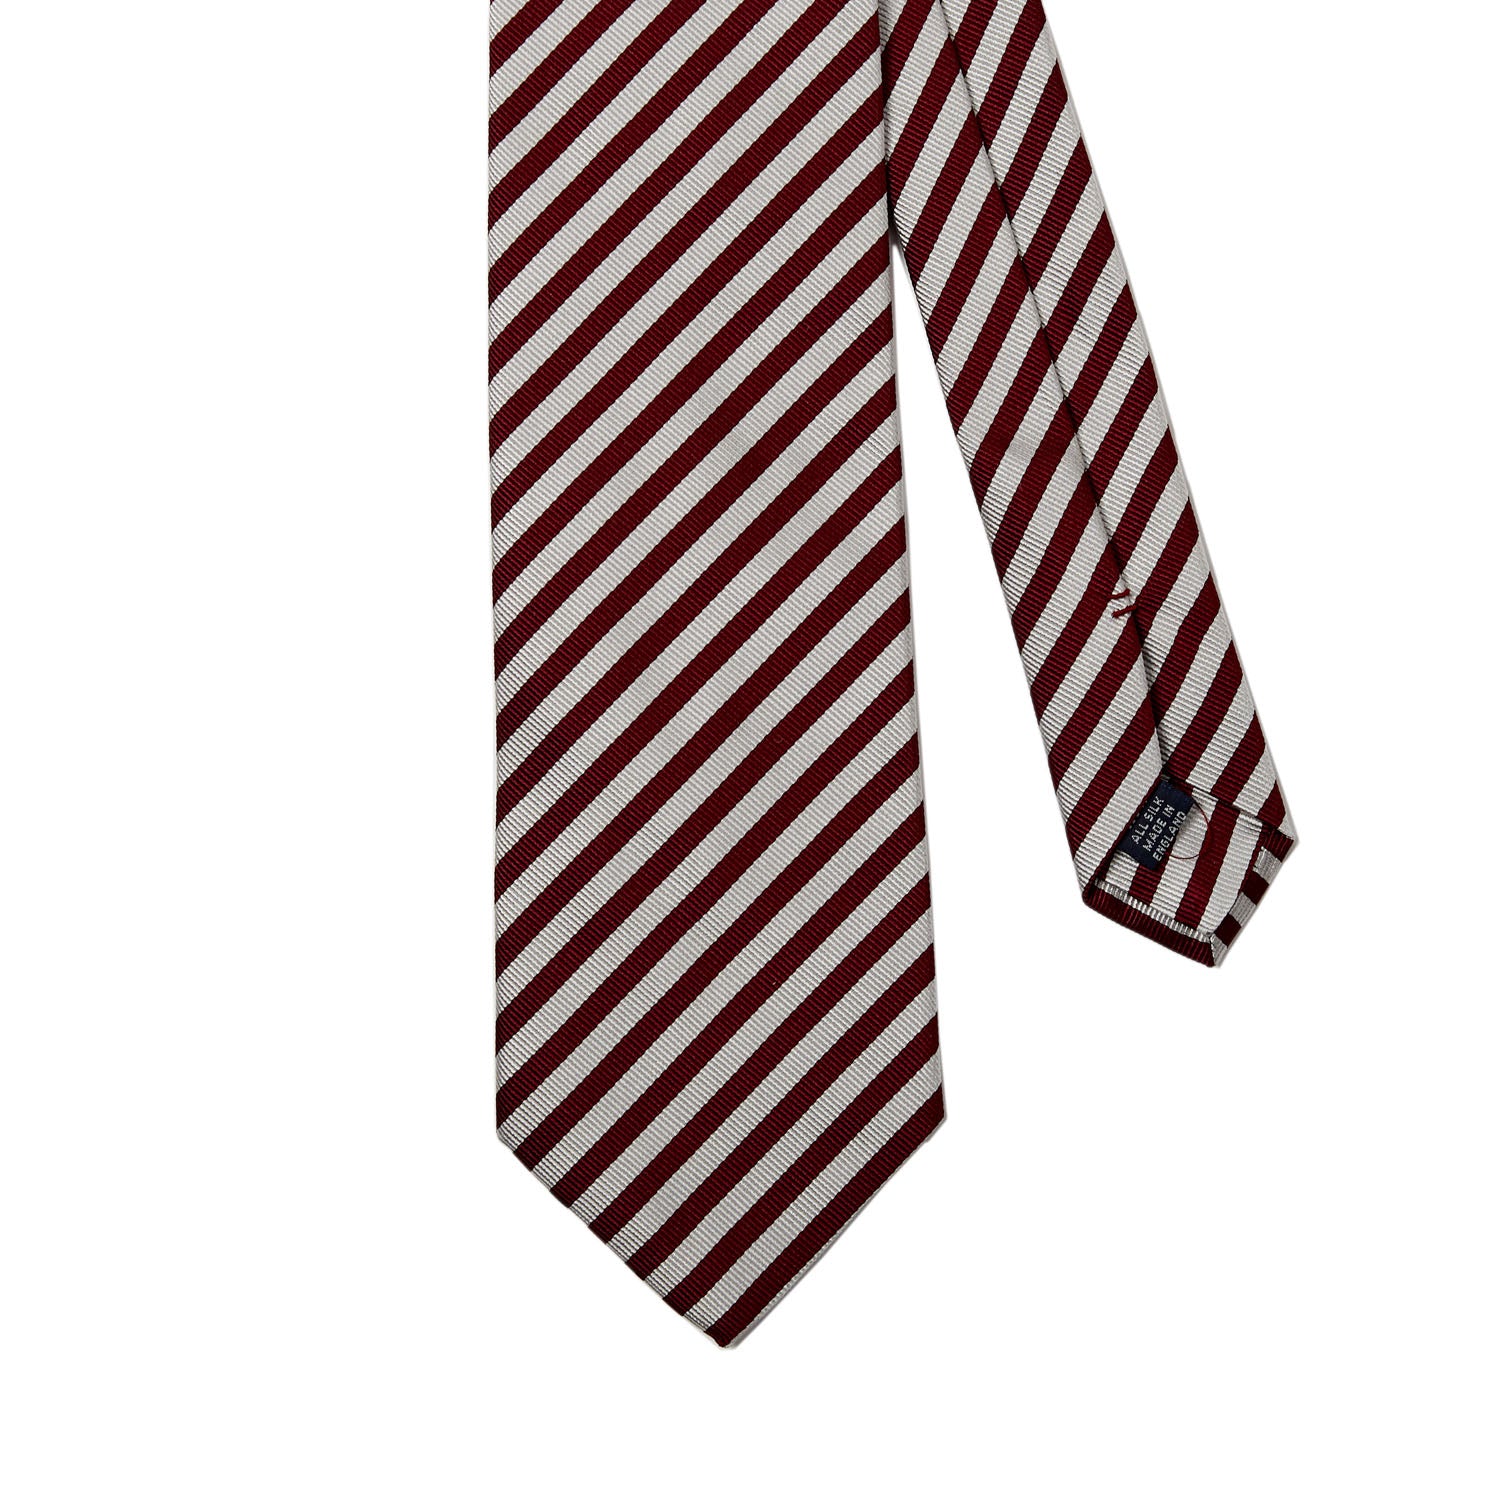 A Sovereign Grade Burgundy and Silver London Stripe Silk Tie by KirbyAllison.com on a white background.